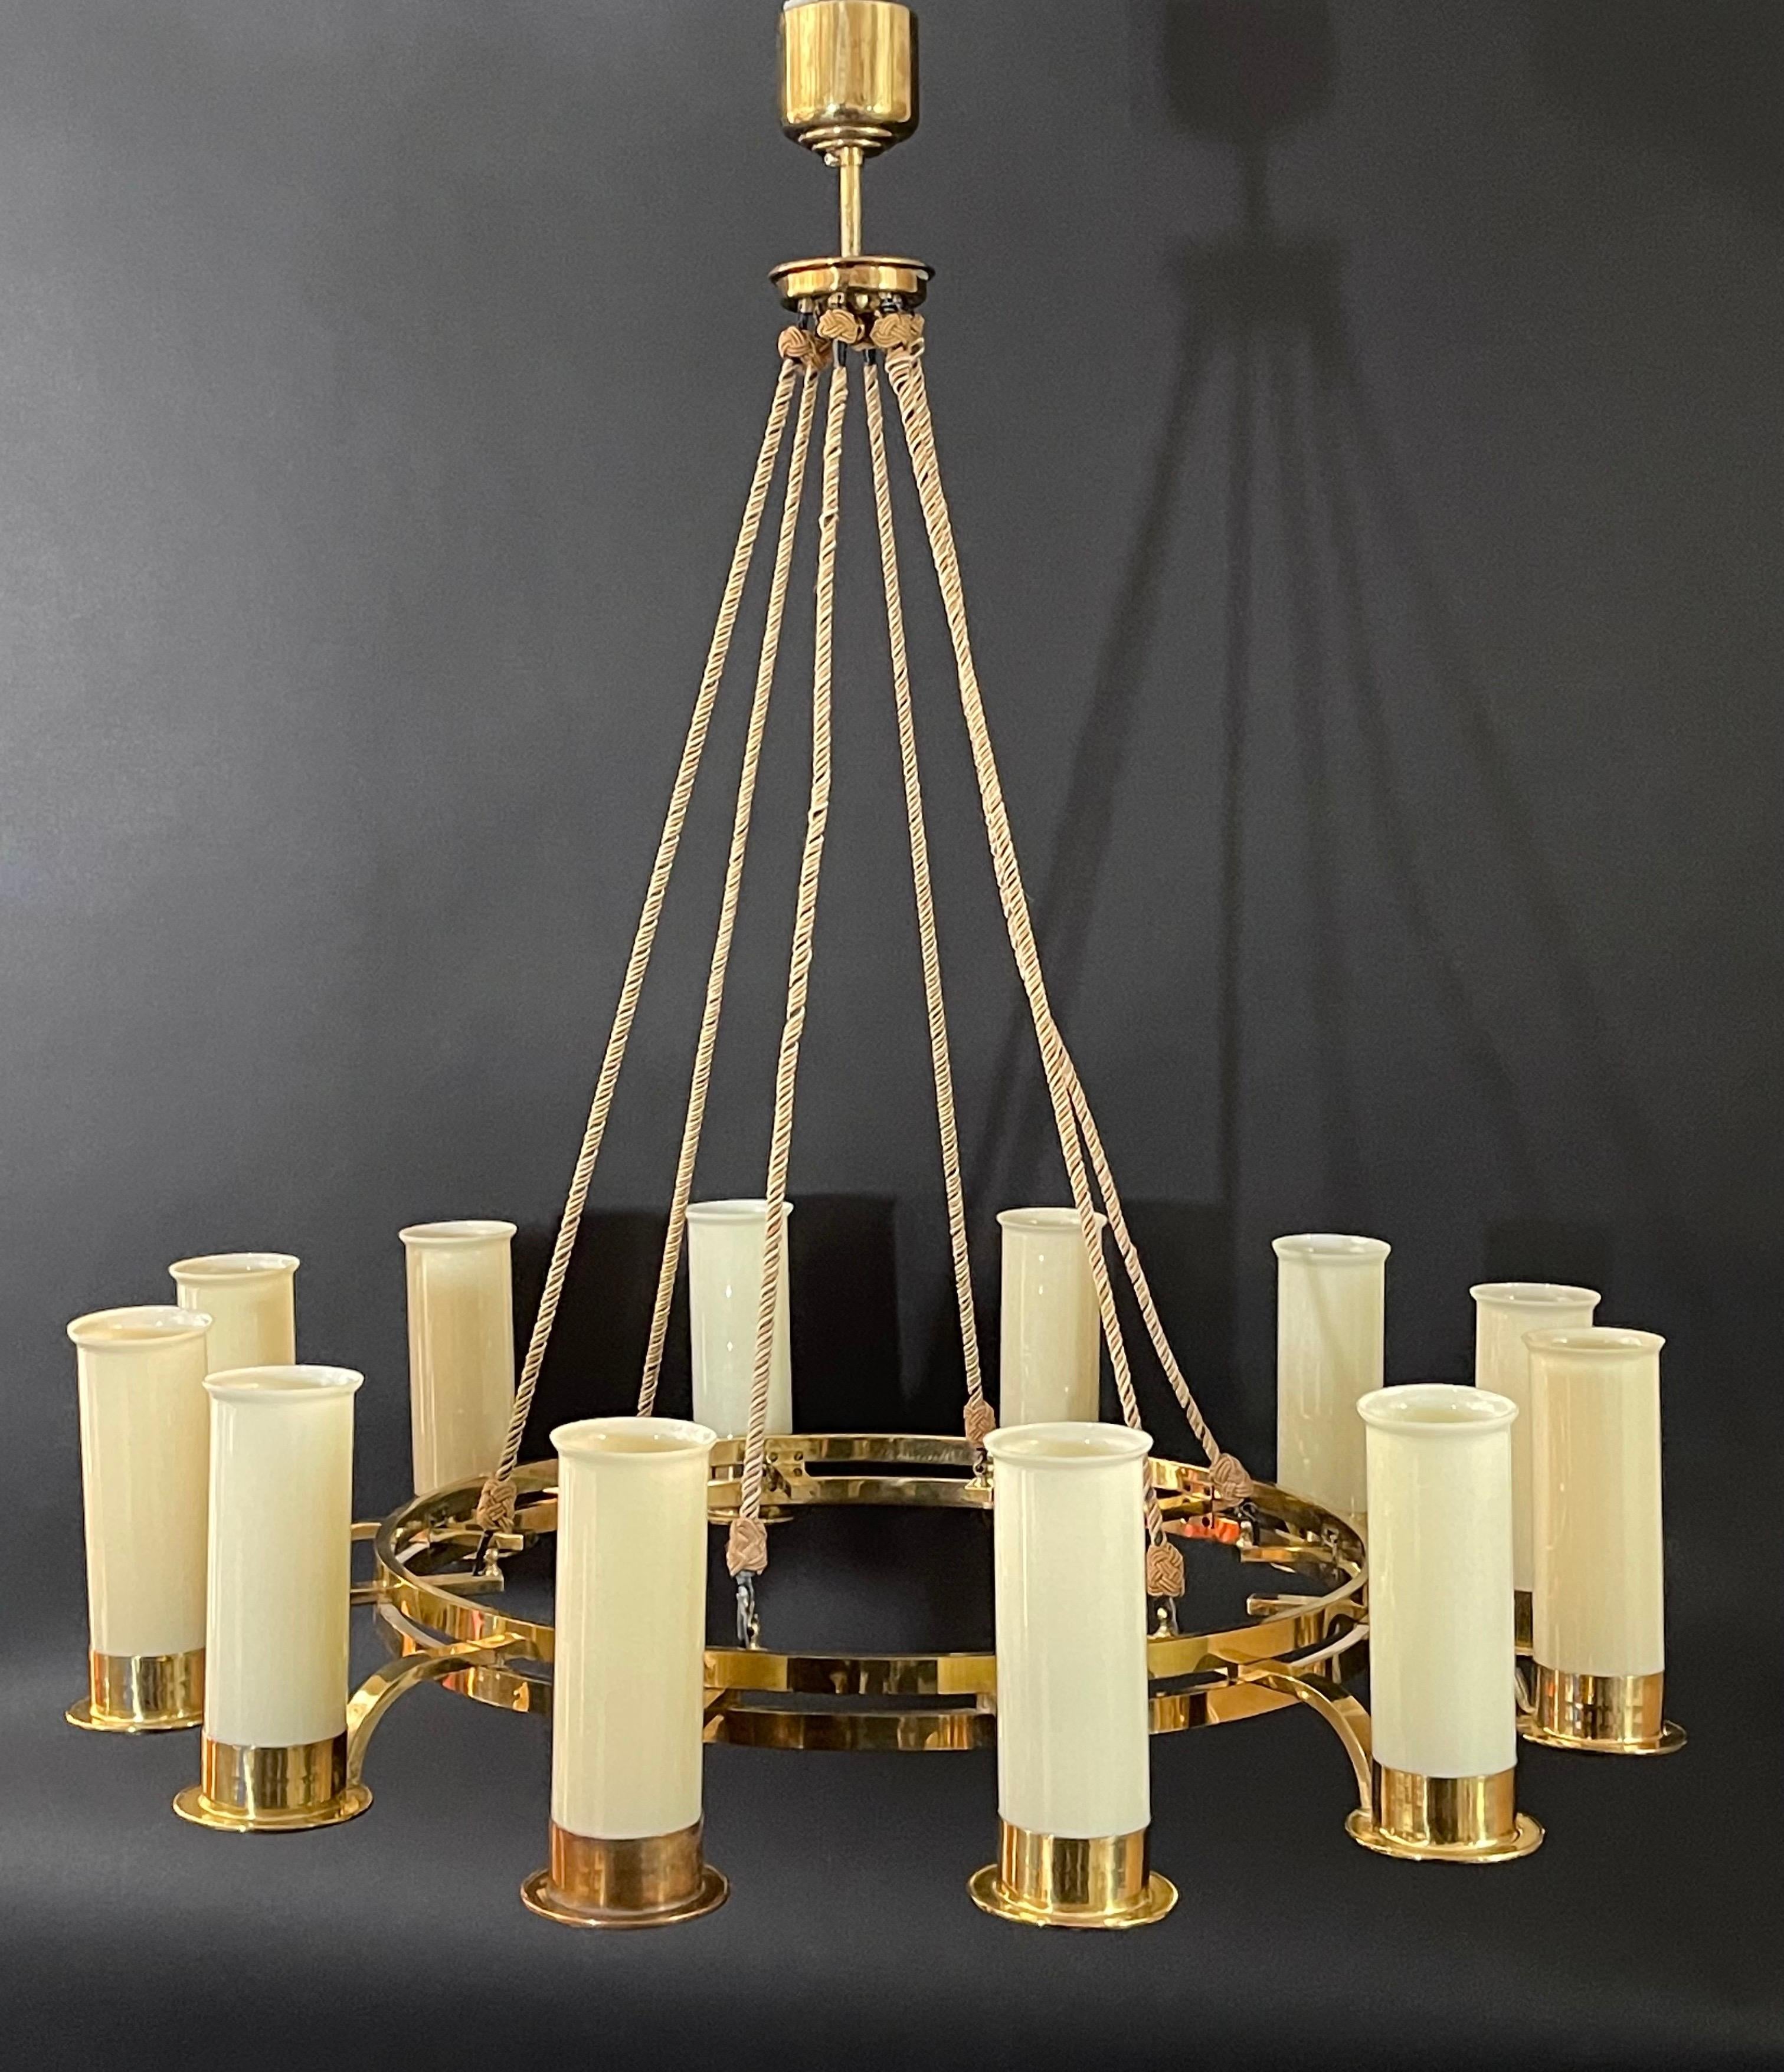 Huge Art Deco glass and opal brass chandelier, circa 1930s.
This beautiful chandelier is made of round polished brass frame and opal glass tubes.
Socket: 12 x Edison (e27) for standard screw bulbs.

The condition is excellent.

